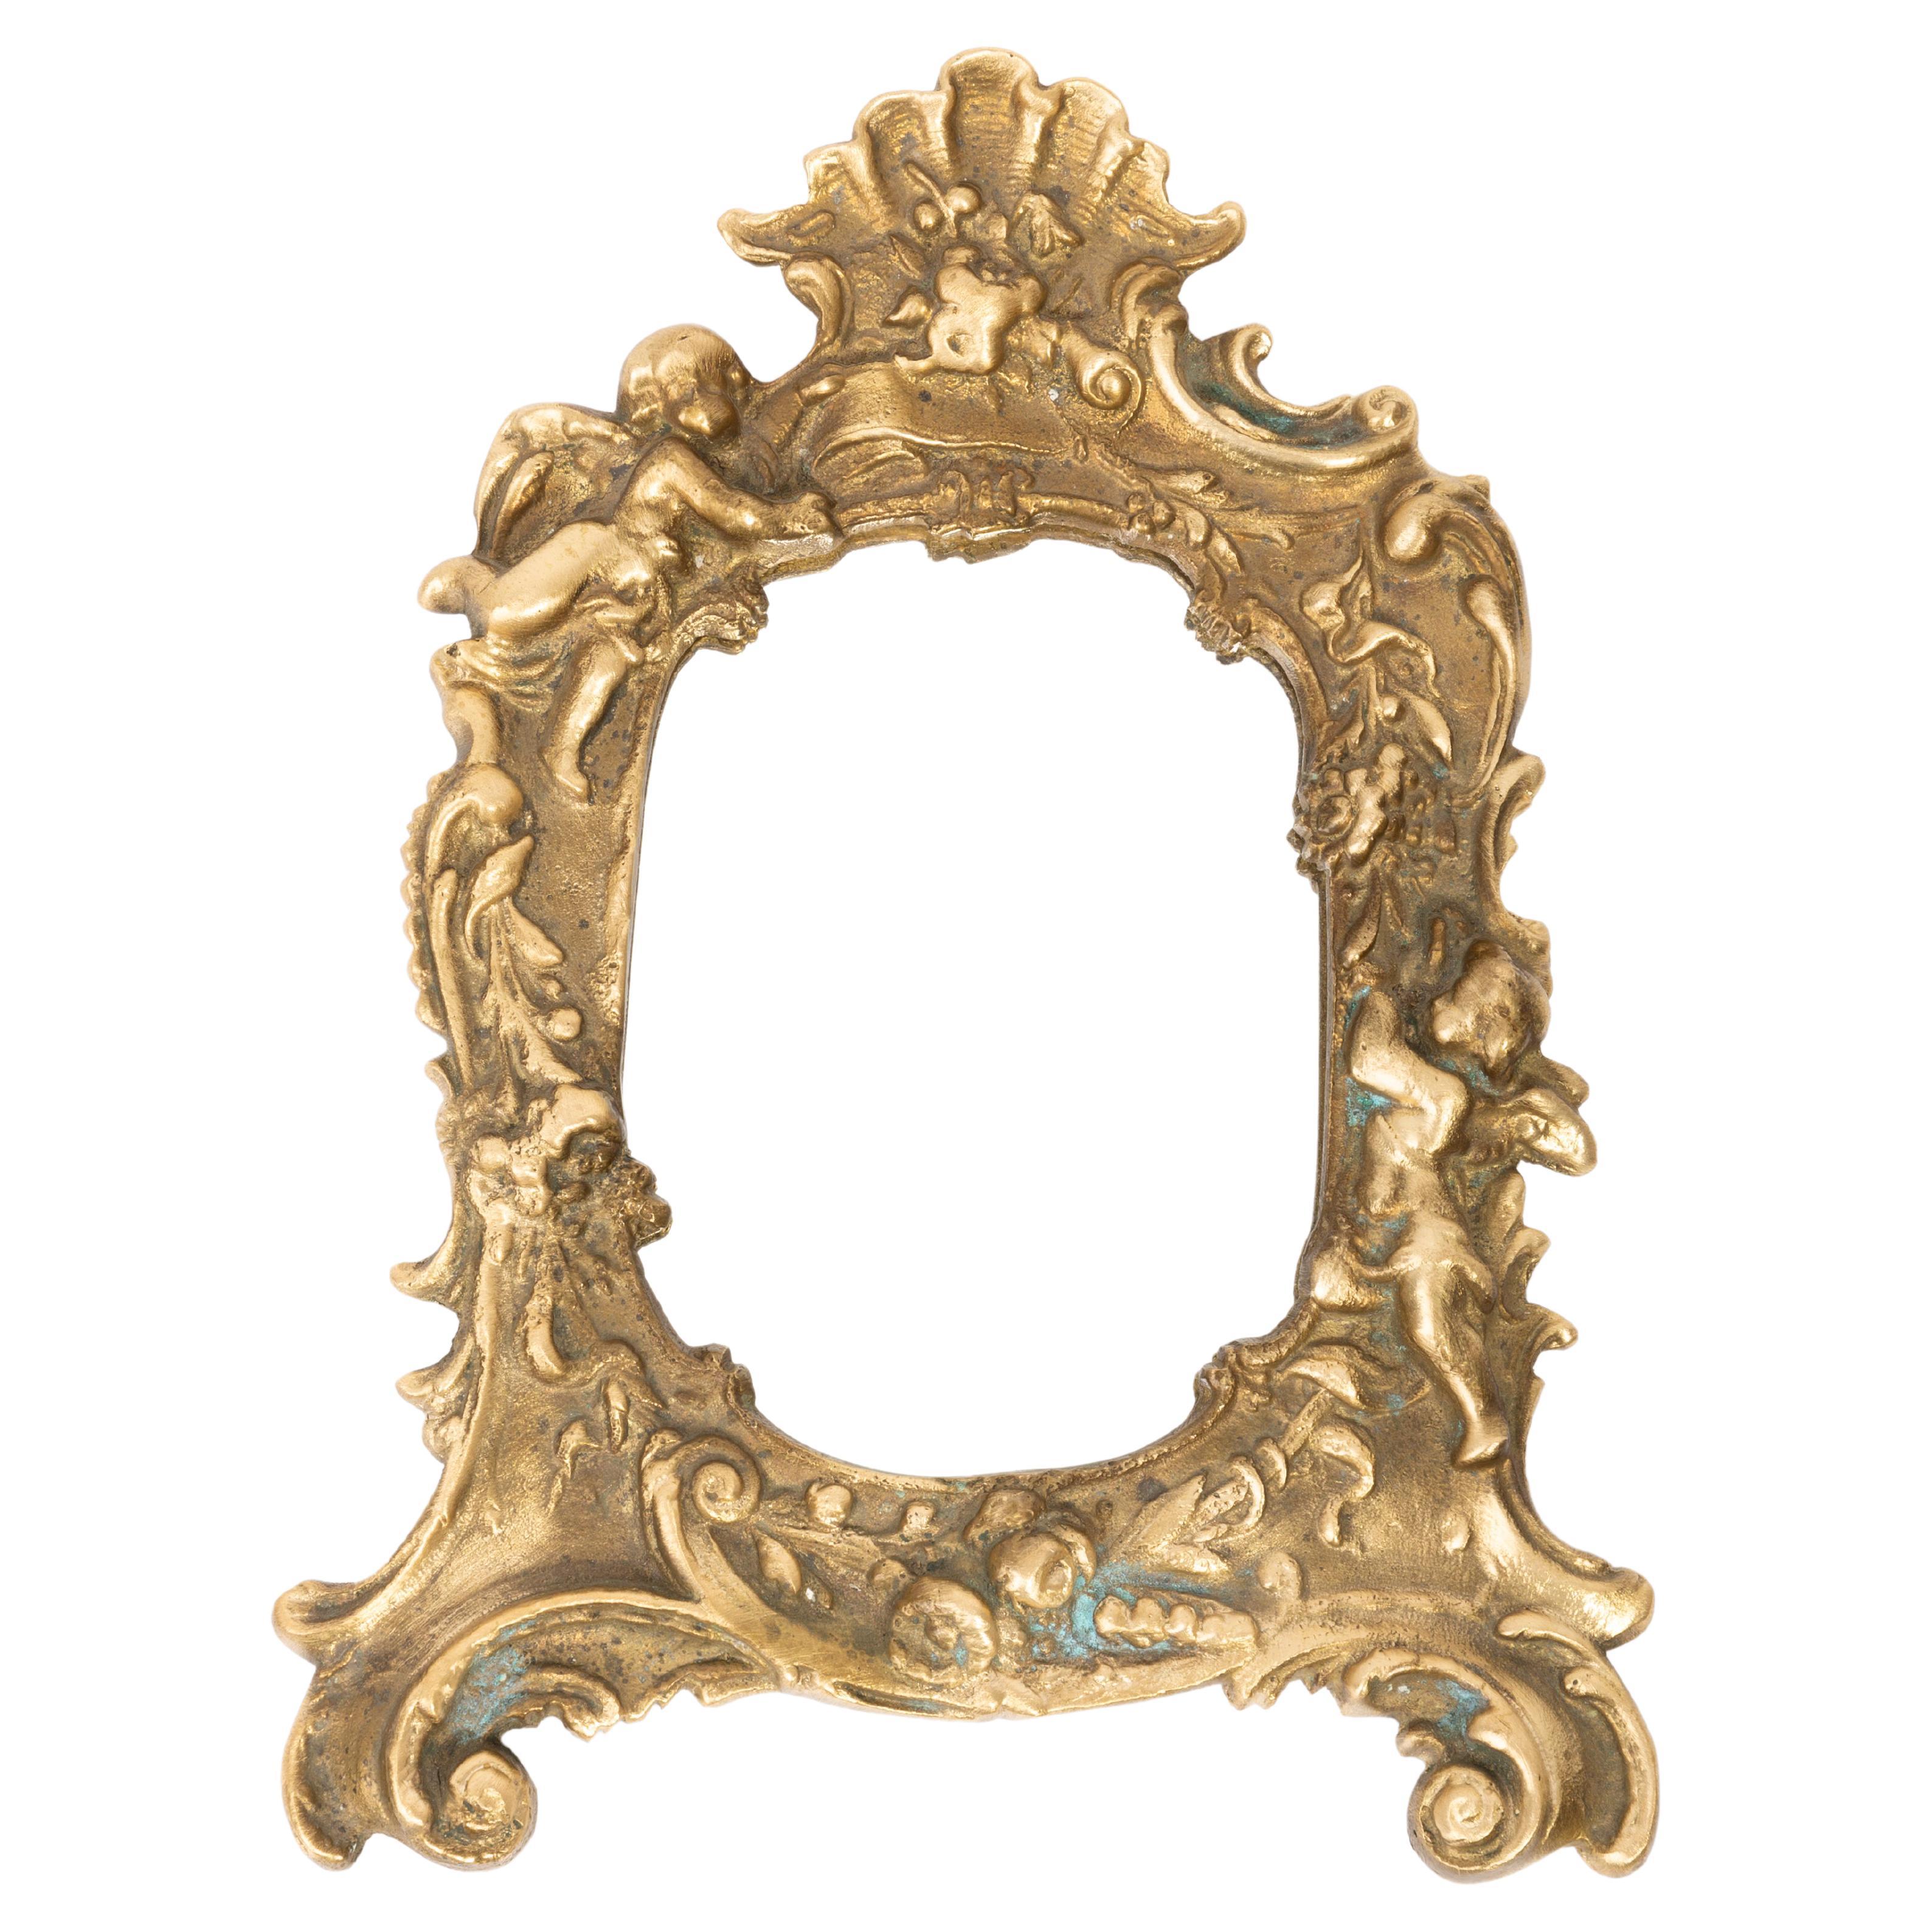 Midcentury Vintage Old Gold Mini Mirror with Angels, Italy, 1960s